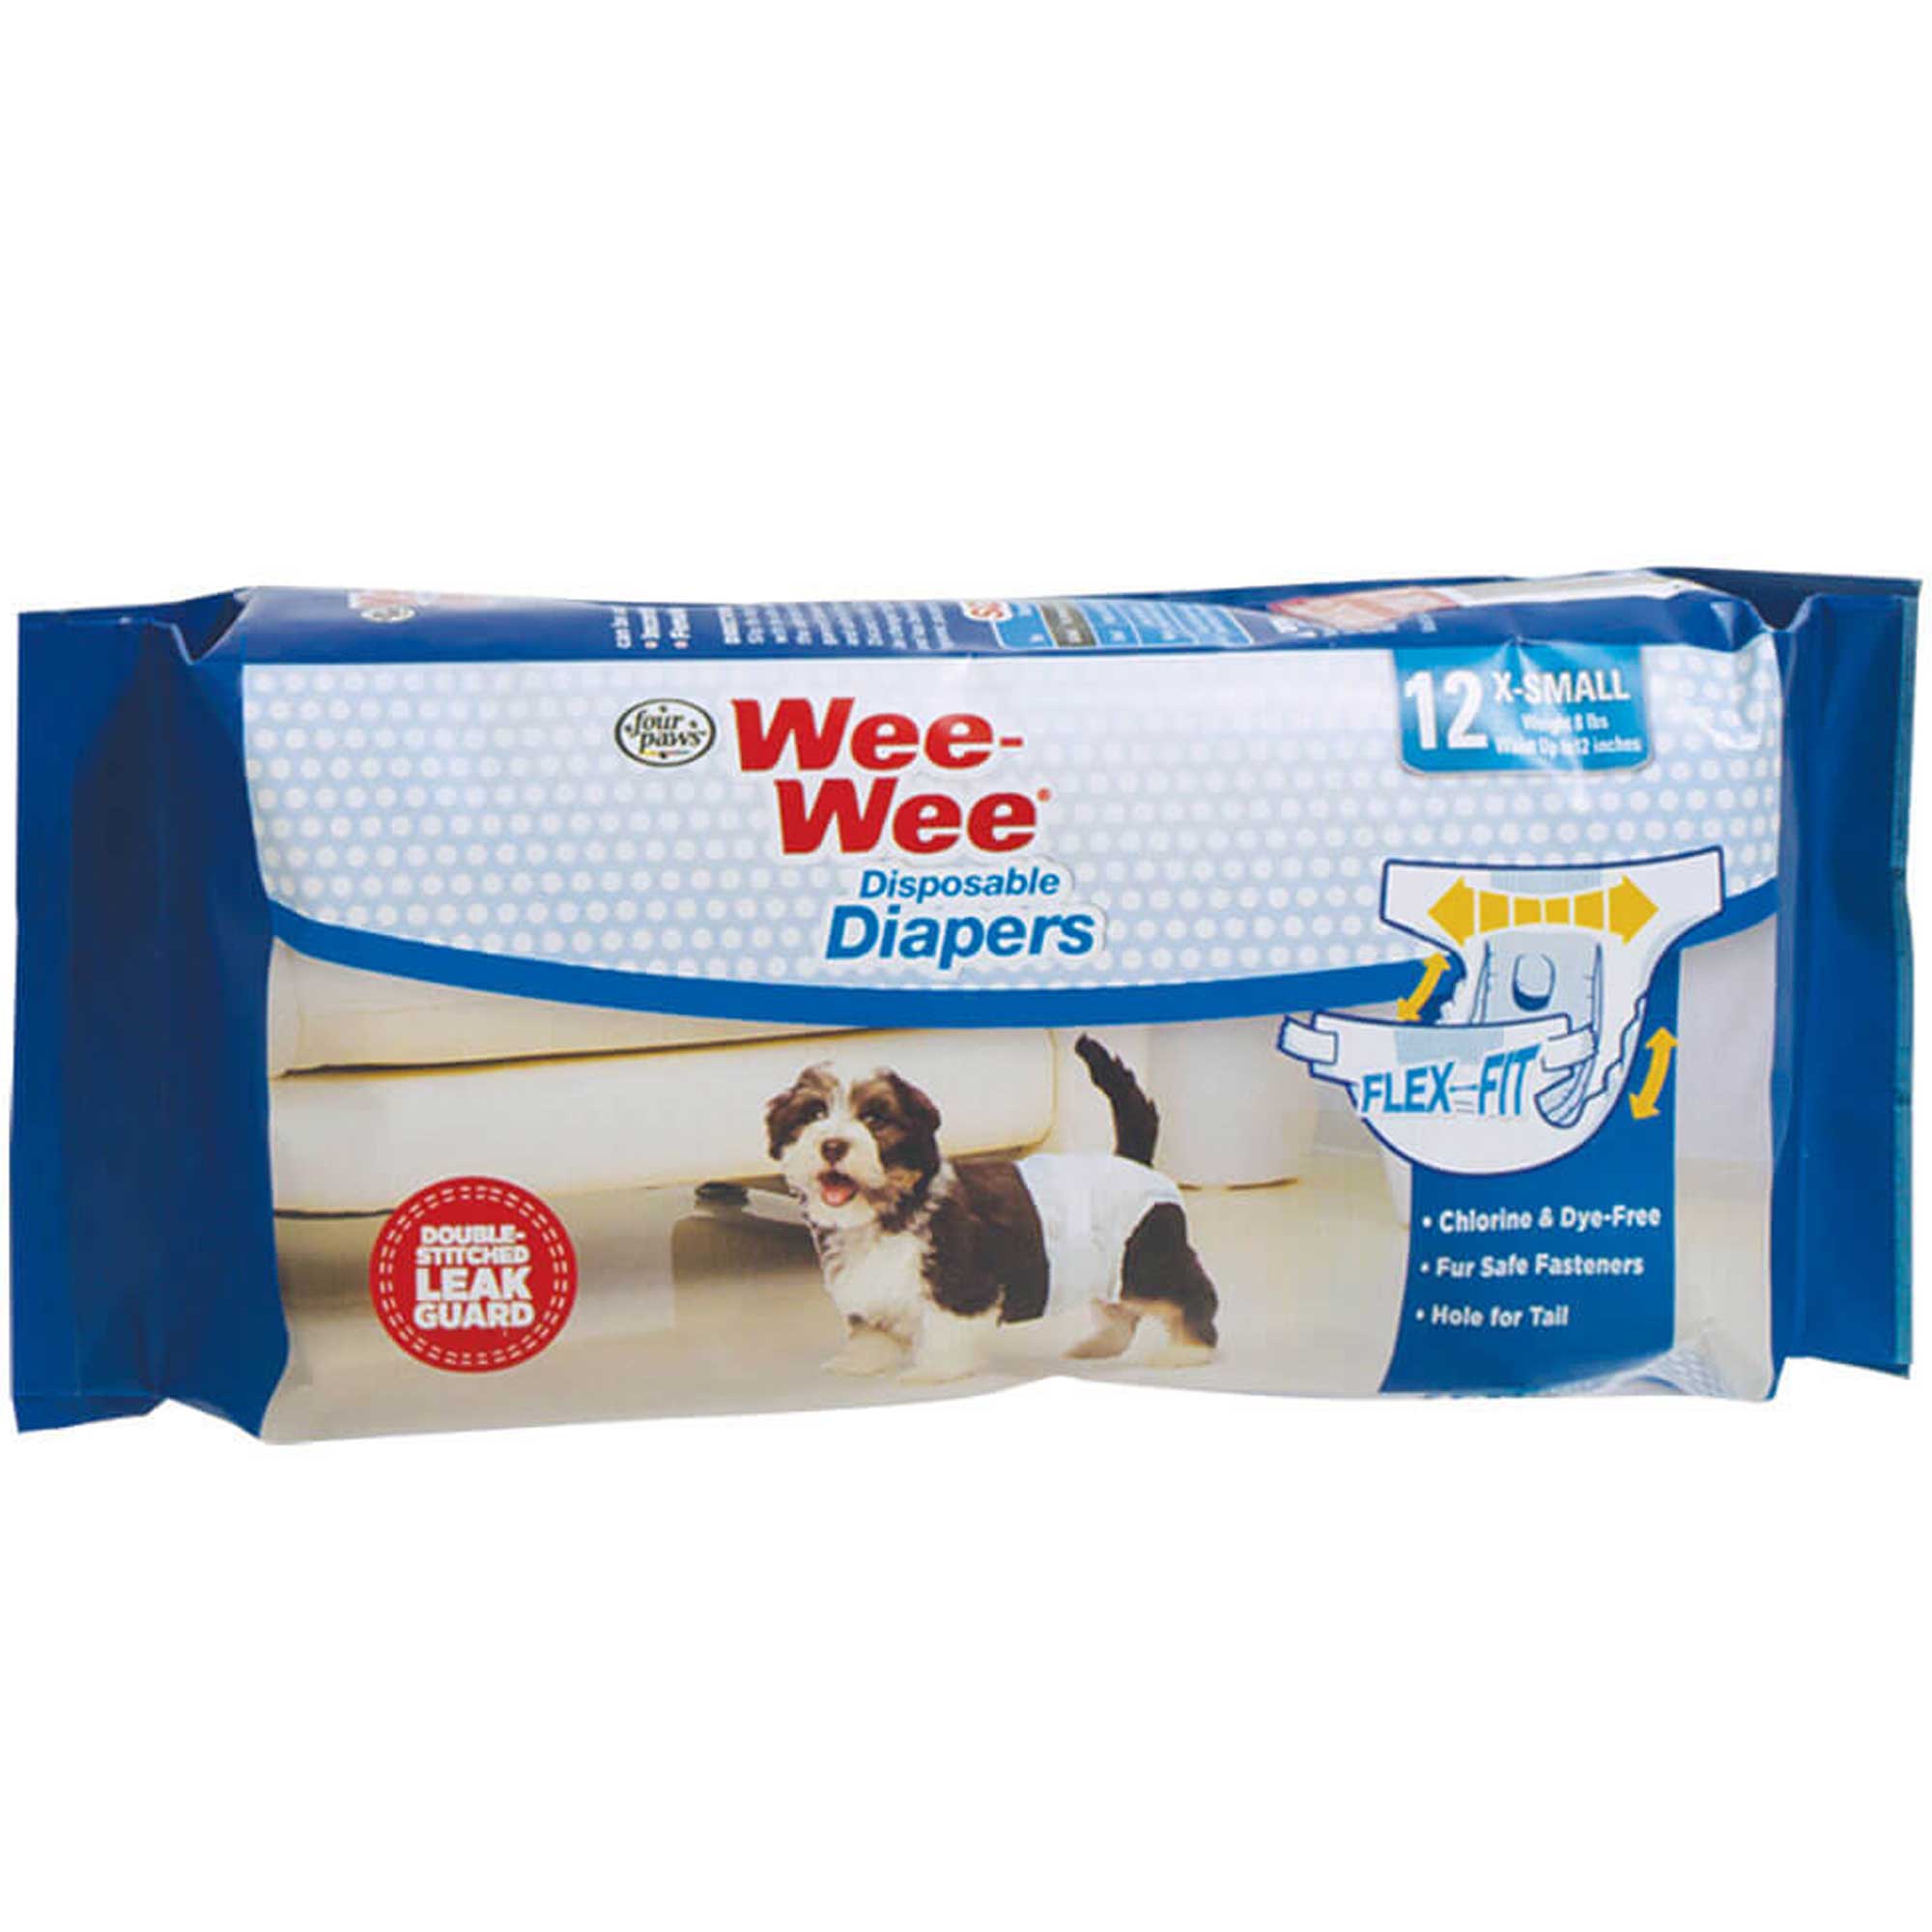 Wee-Wee Disposable Diapers Usage